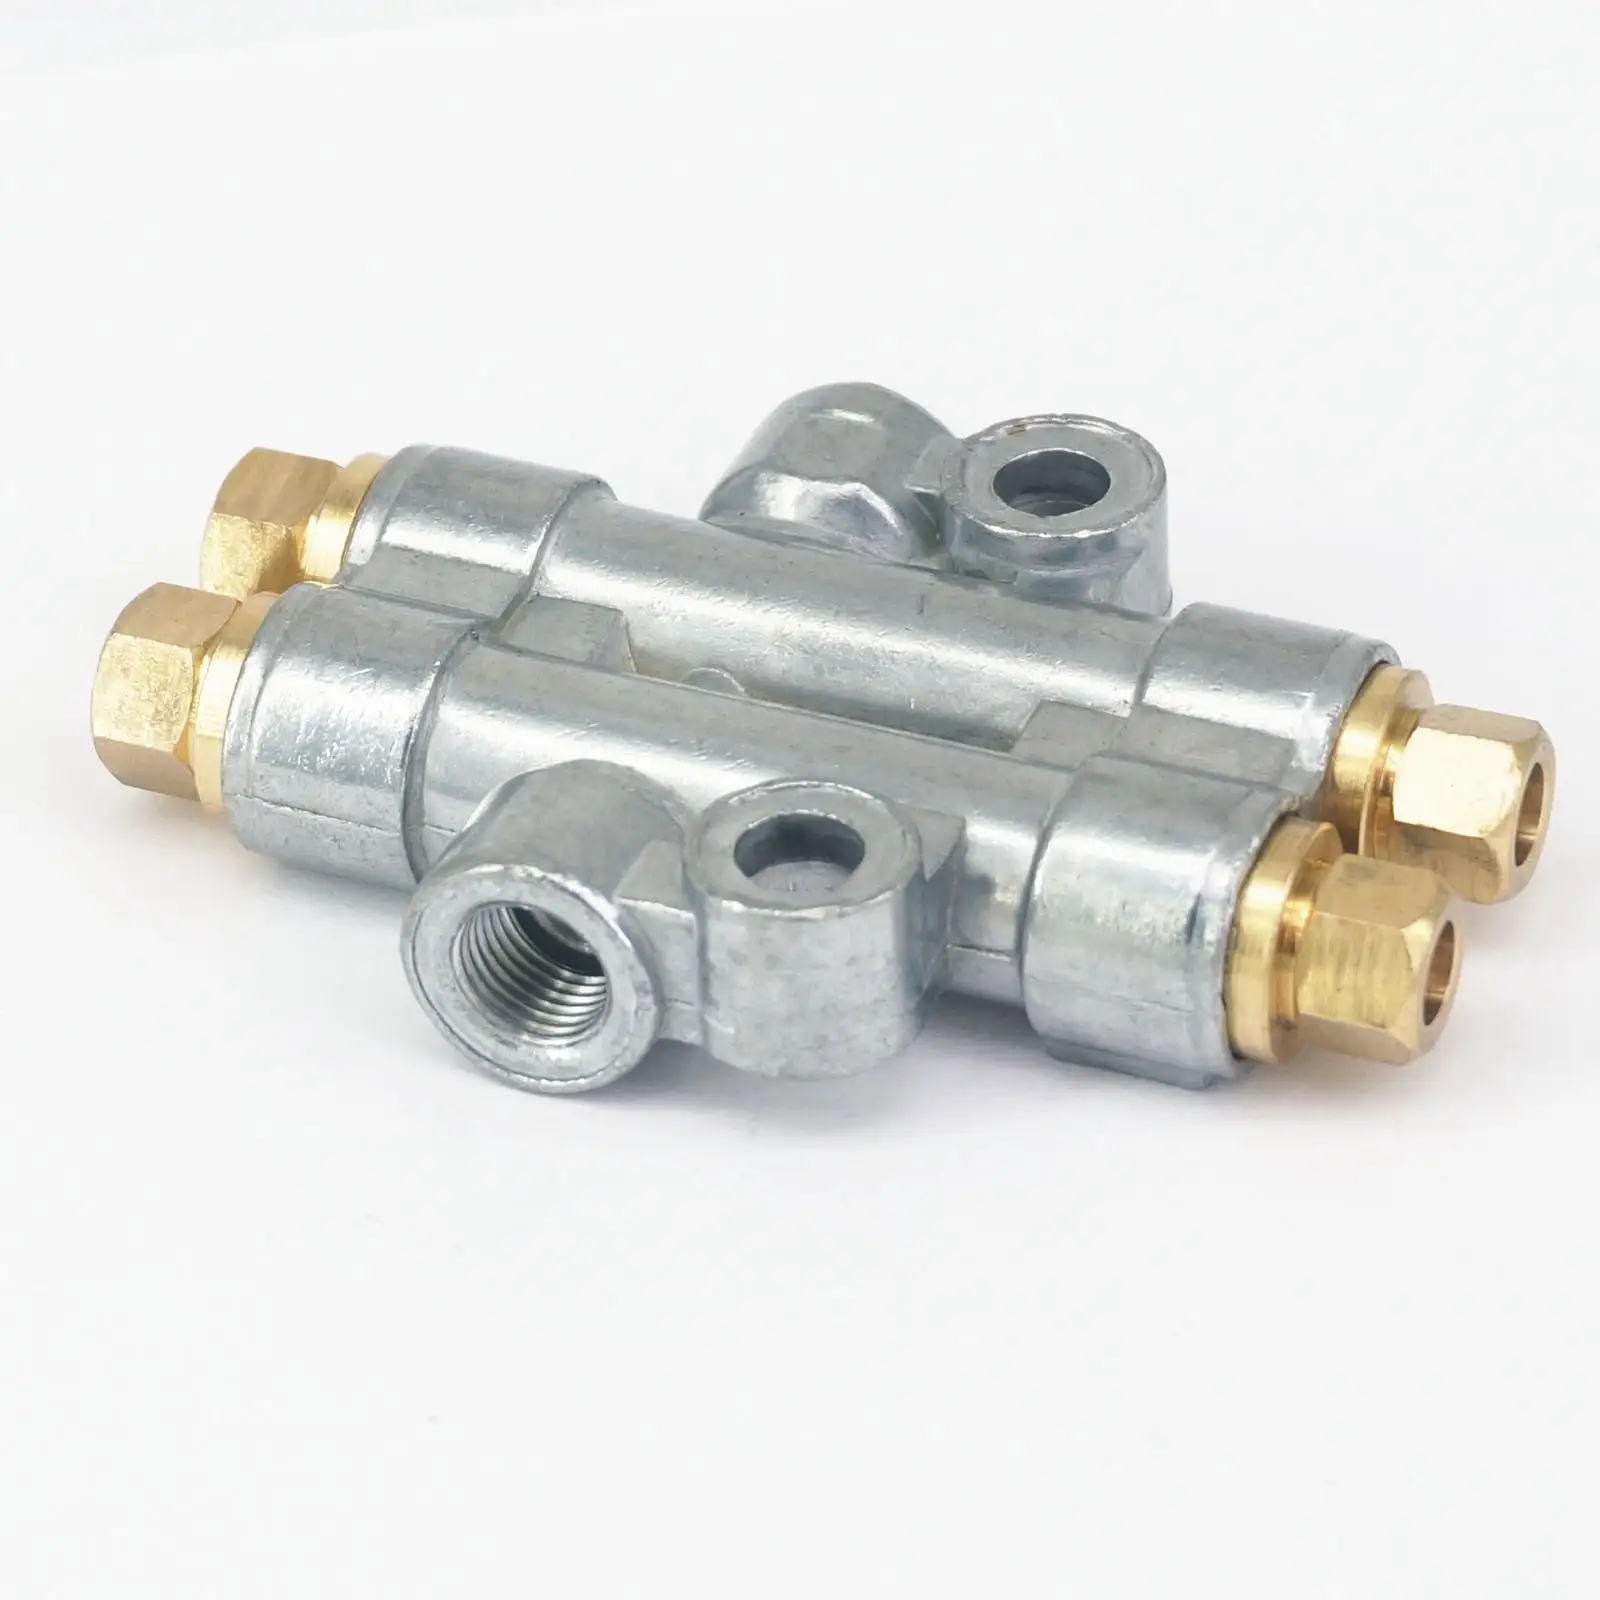 In M8x1 Out M10x1 2 Ways Aluminum/Brass Lube Oil Piston Distributor Value Manifold Block for Centralized Lubrication System